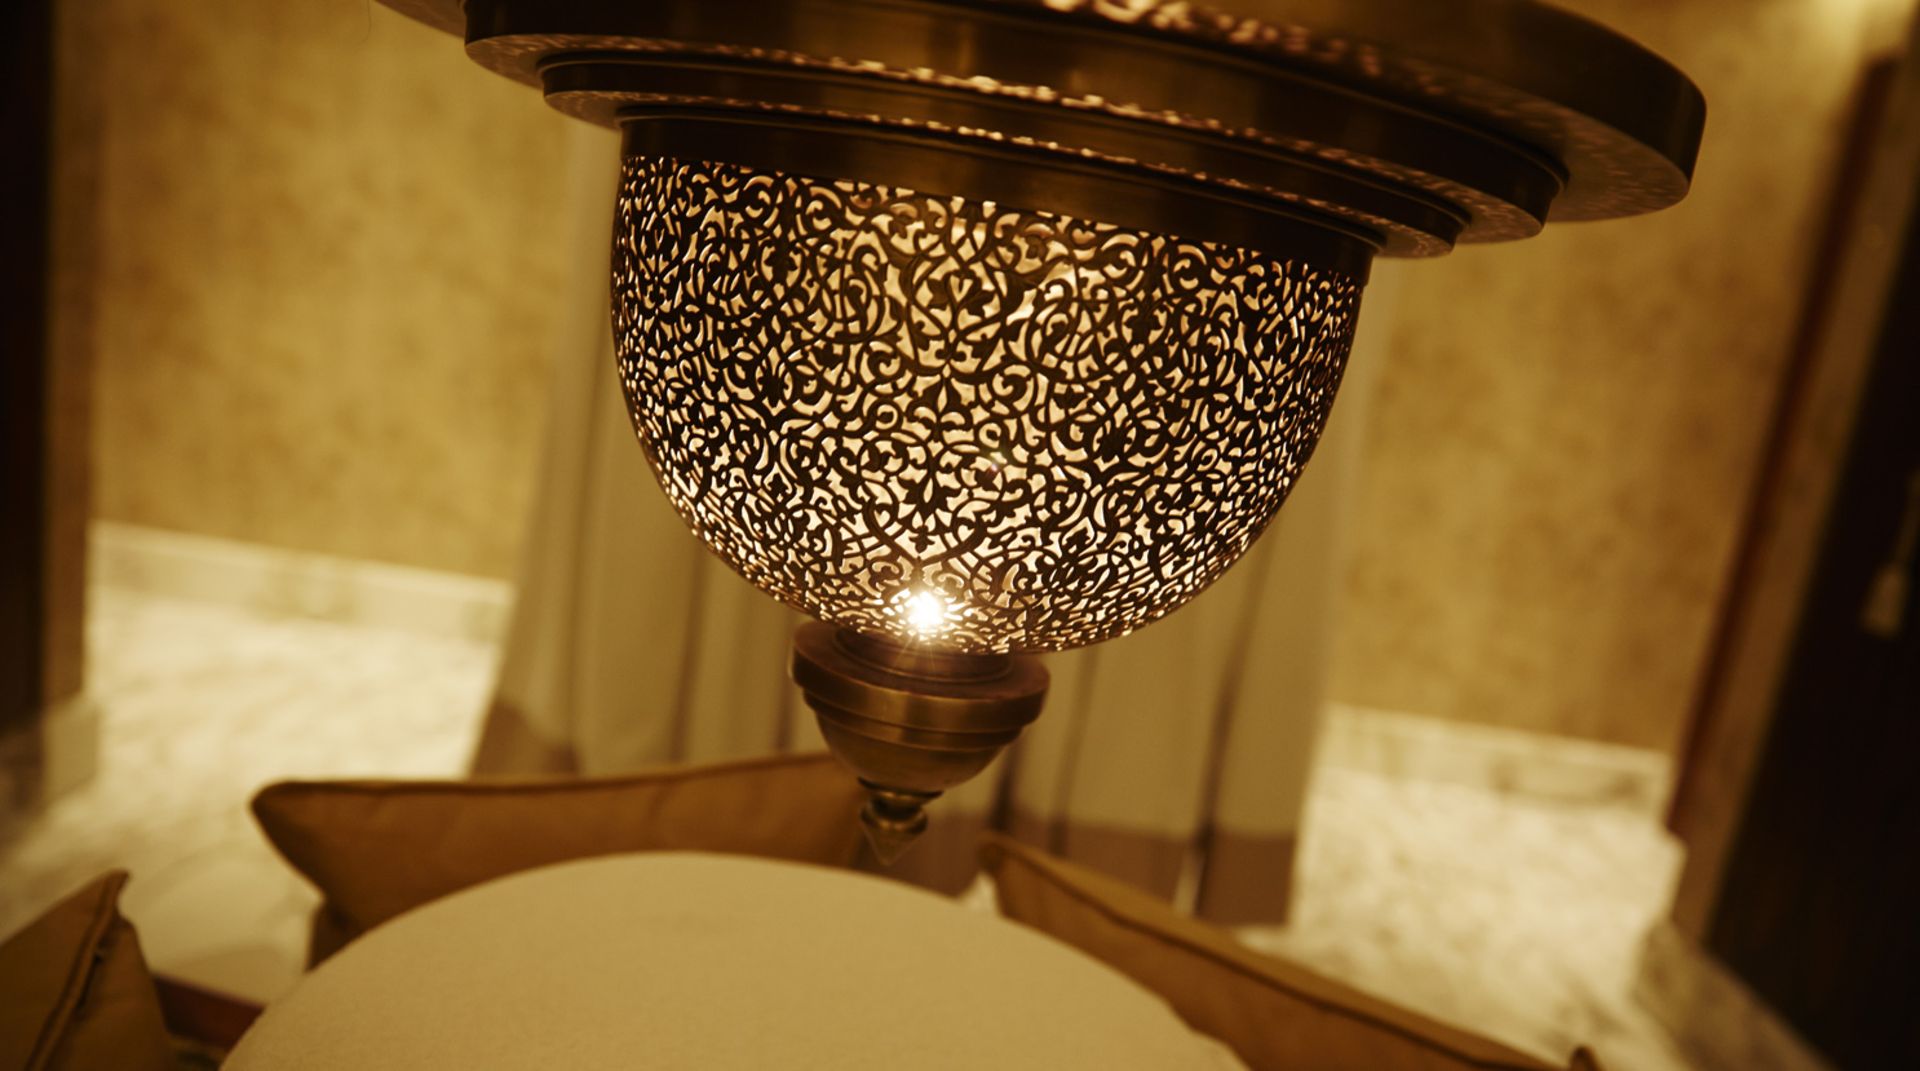 1 x Large 1.3 Metre Moroccan-style Brass Pendant Statement Light Featuring Intricate Filigree - Image 7 of 9